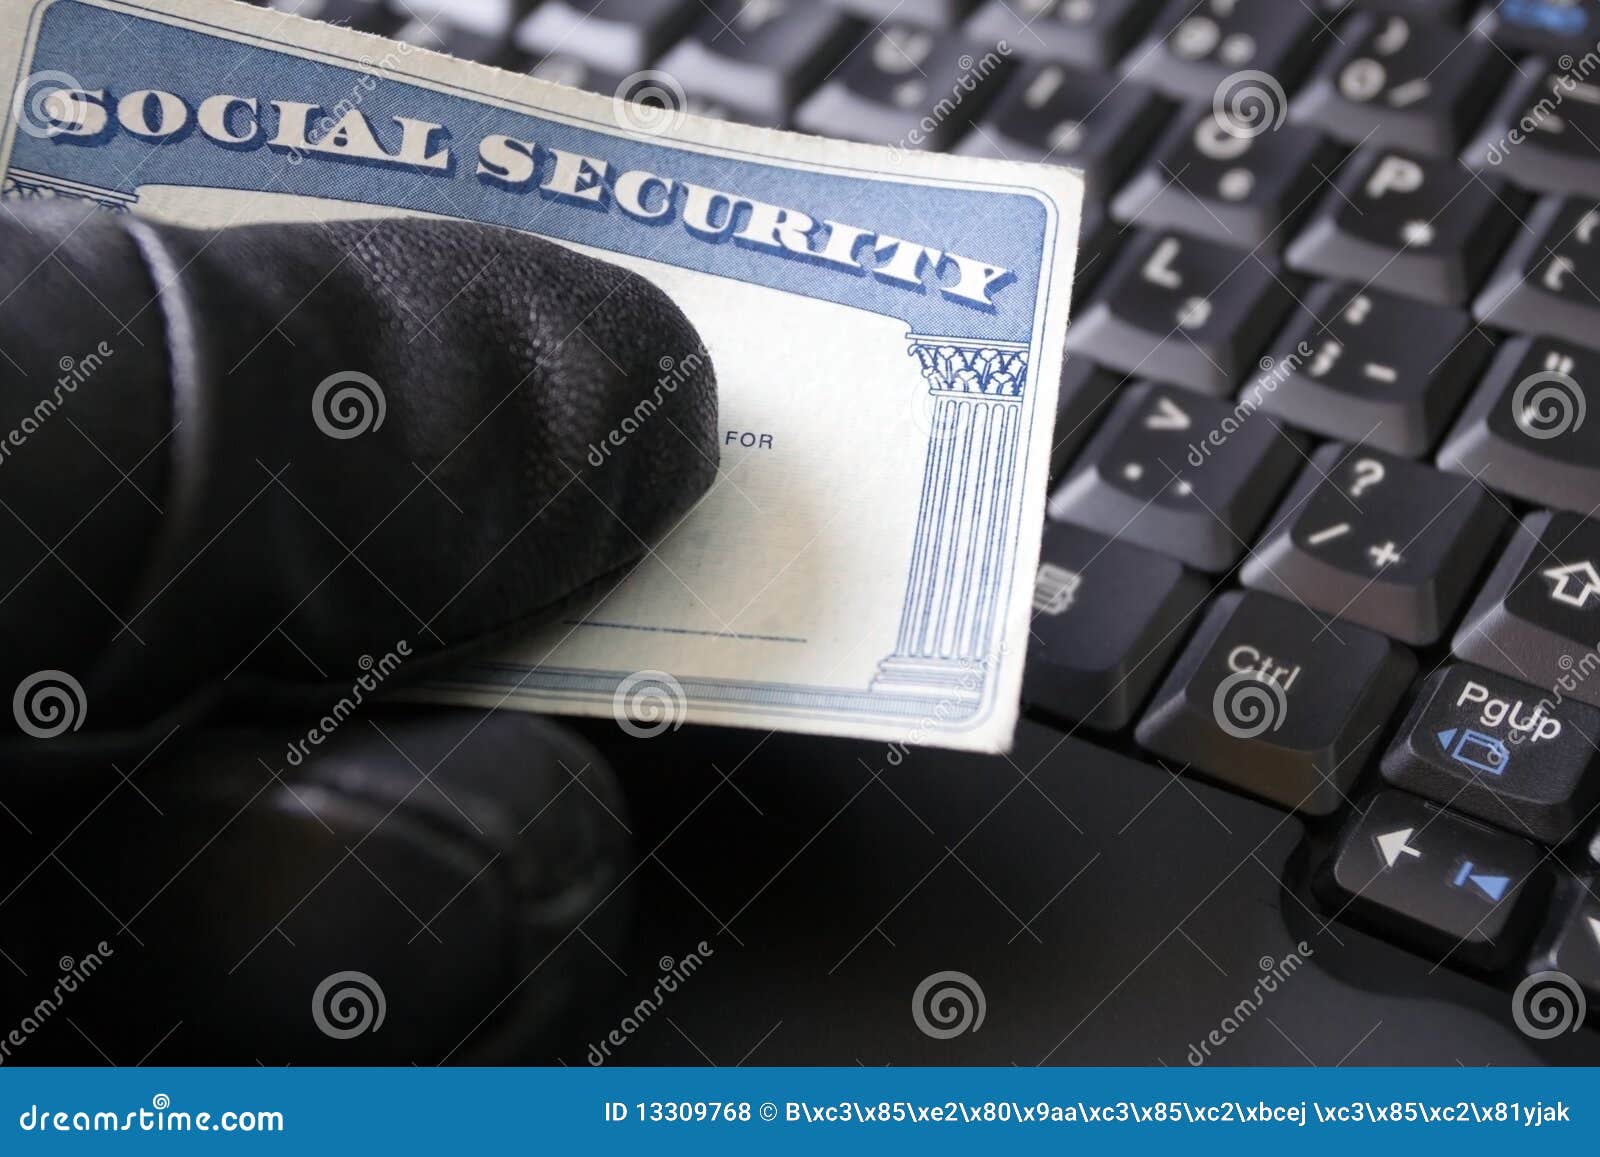 identity theft and social security card